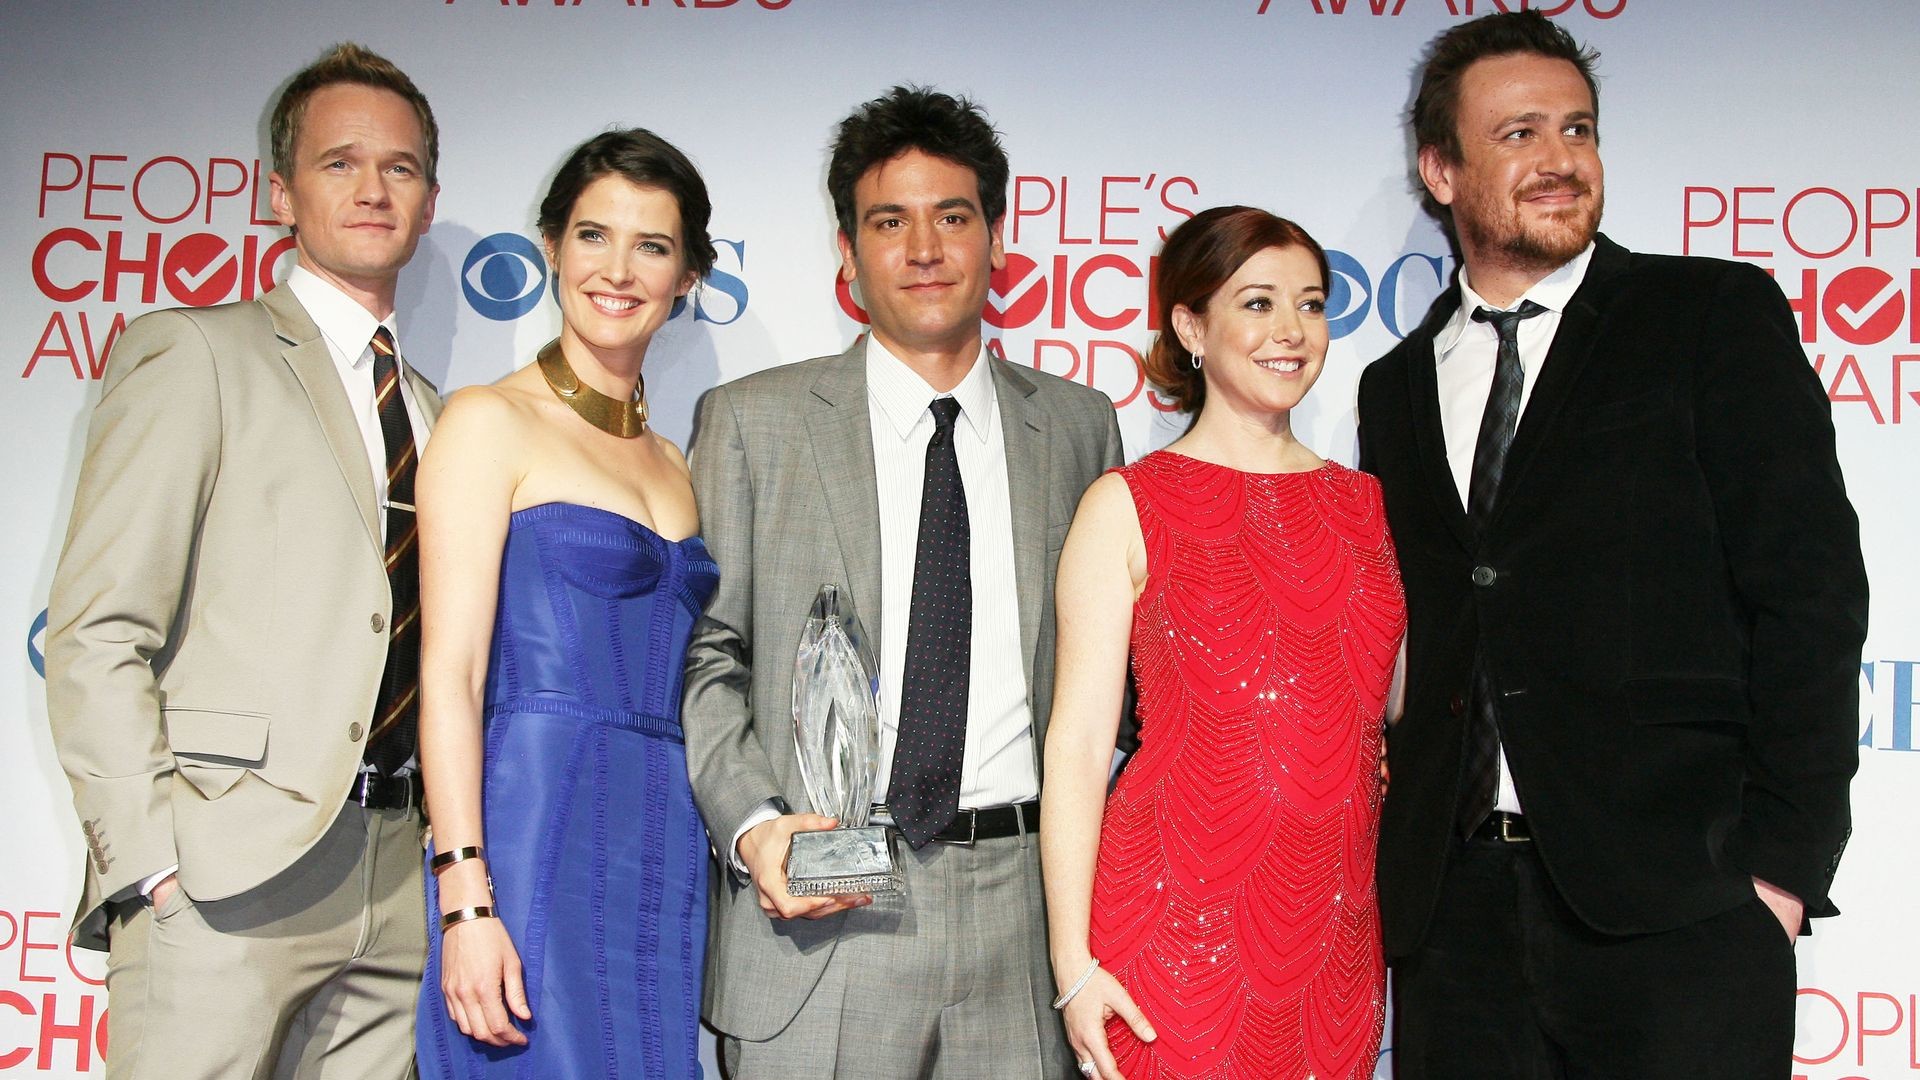 how i met your mother wallpapers,event,premiere,fashion,white collar worker,suit